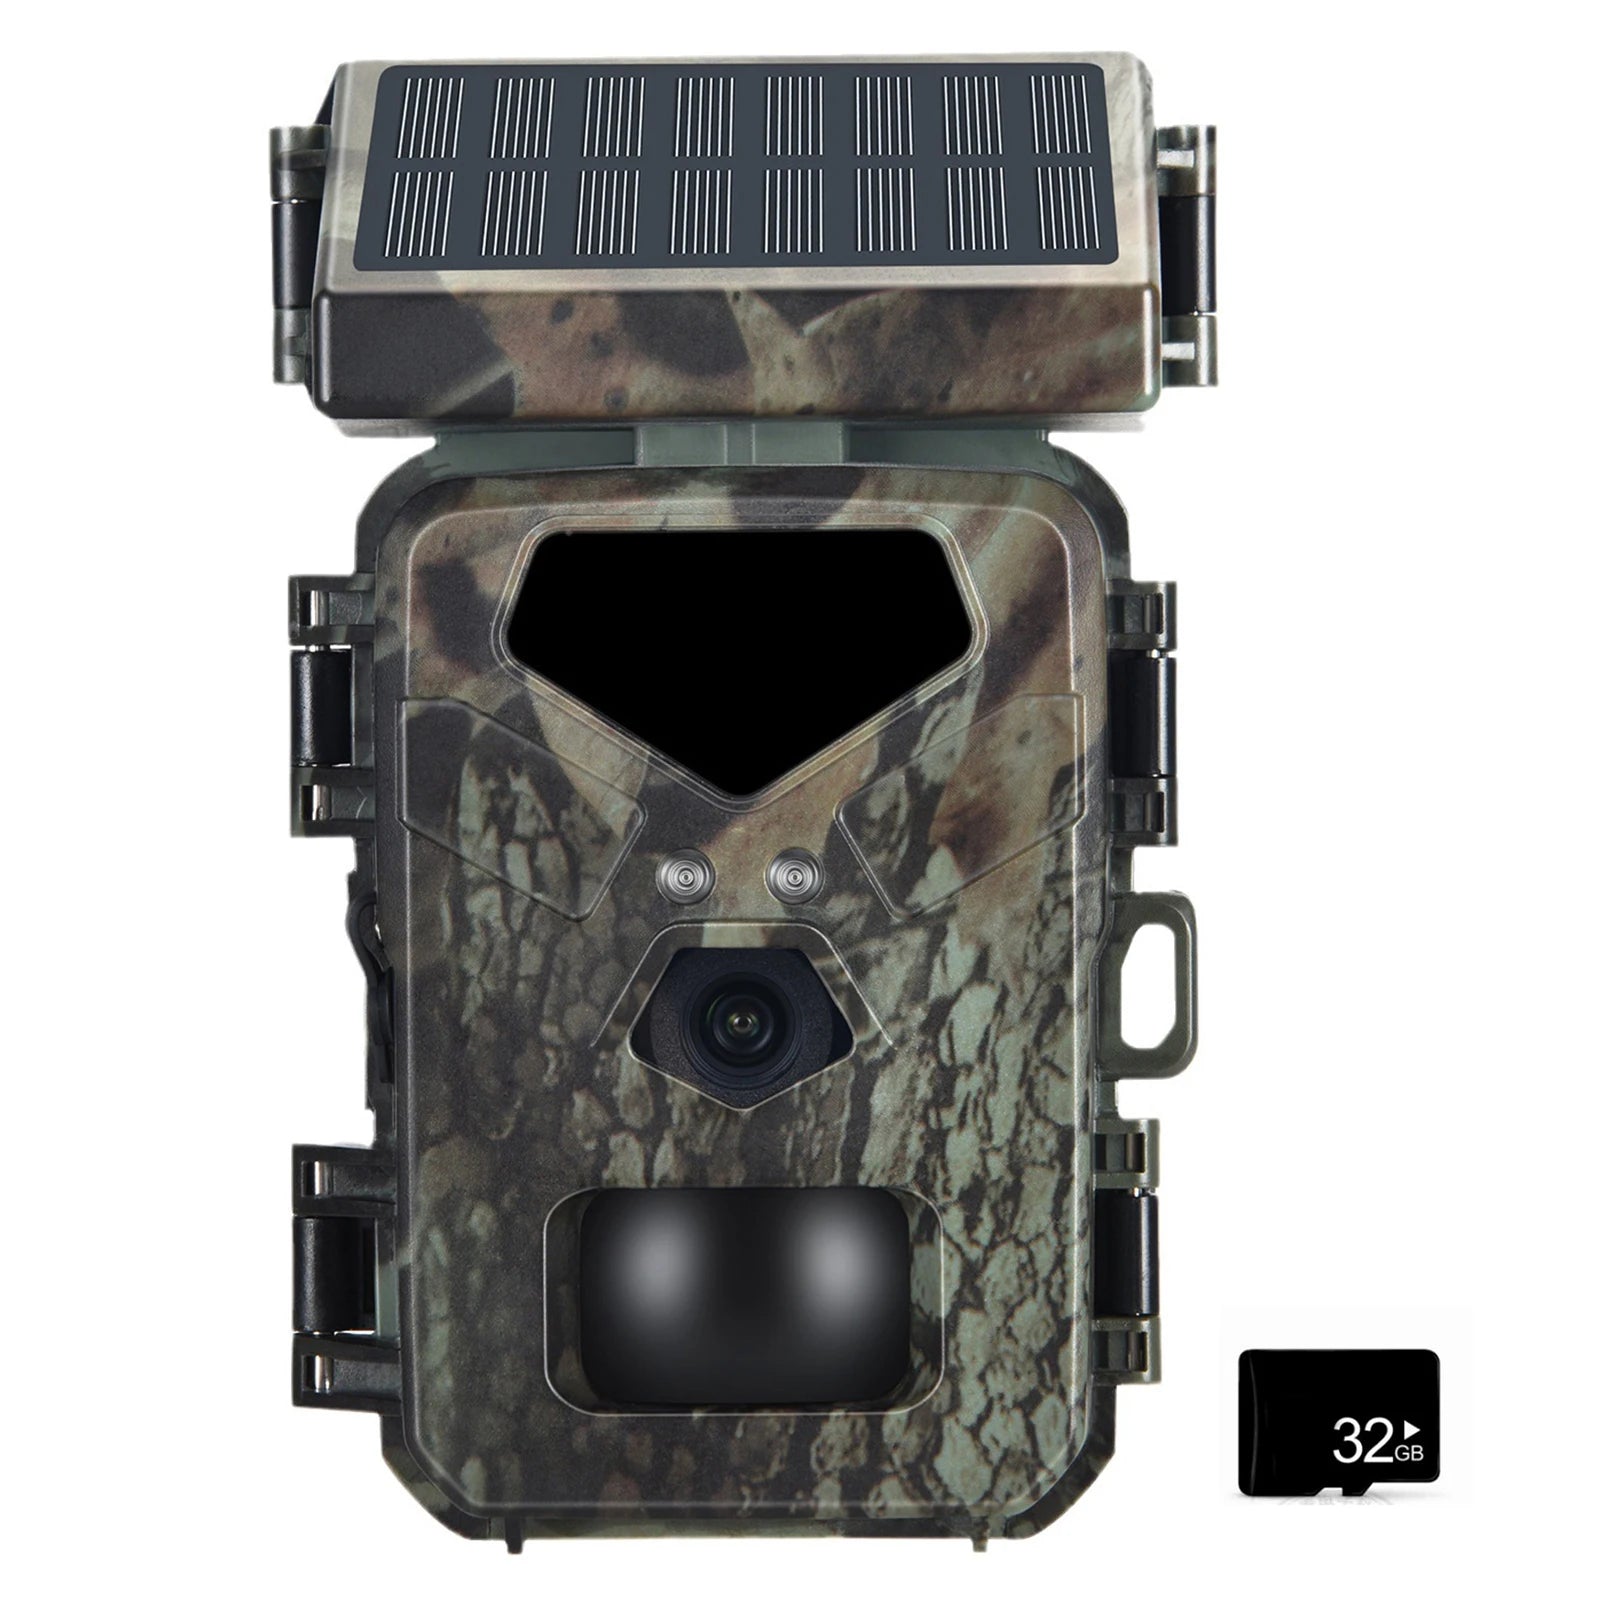 Solar cameras security system with a camouflage design, equipped with a solar panel for sustainable power, designed for outdoor use in natural environments.